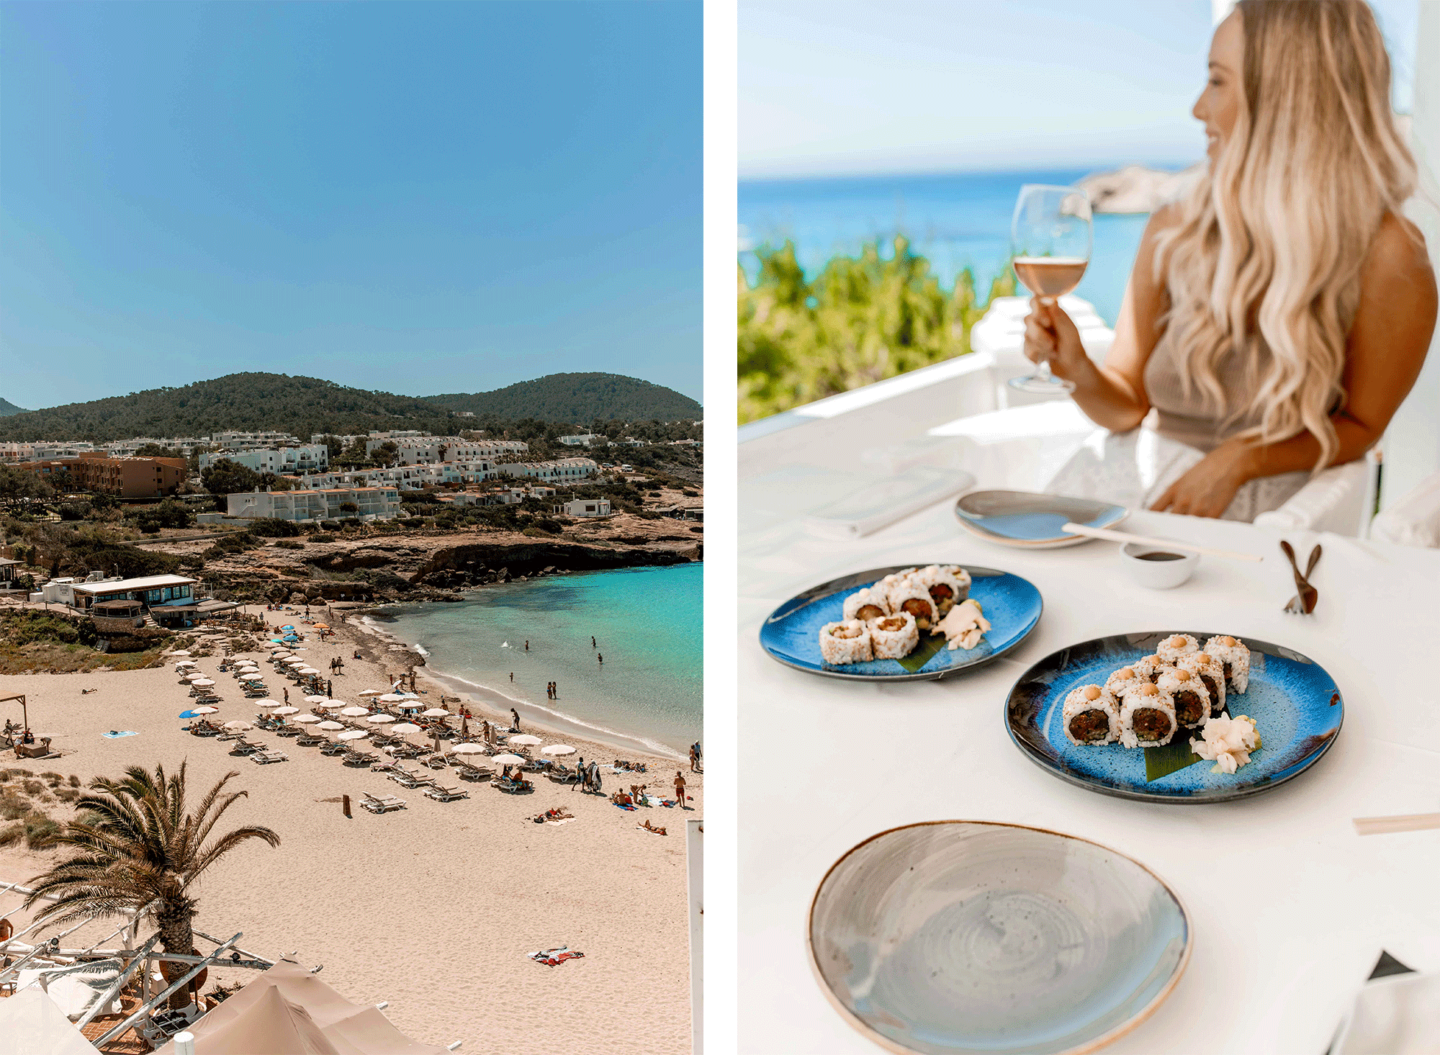 1-Top-things-to-do-in-Ibiza-Bucket-list--Instagram-Story-Template--kelseyinlondon-Kelsey-Heinrichs--What-to-do-in-Ibiza--Where-to-go-in-Ibiza-top-places-in-Ibiza-cotton-beach-club